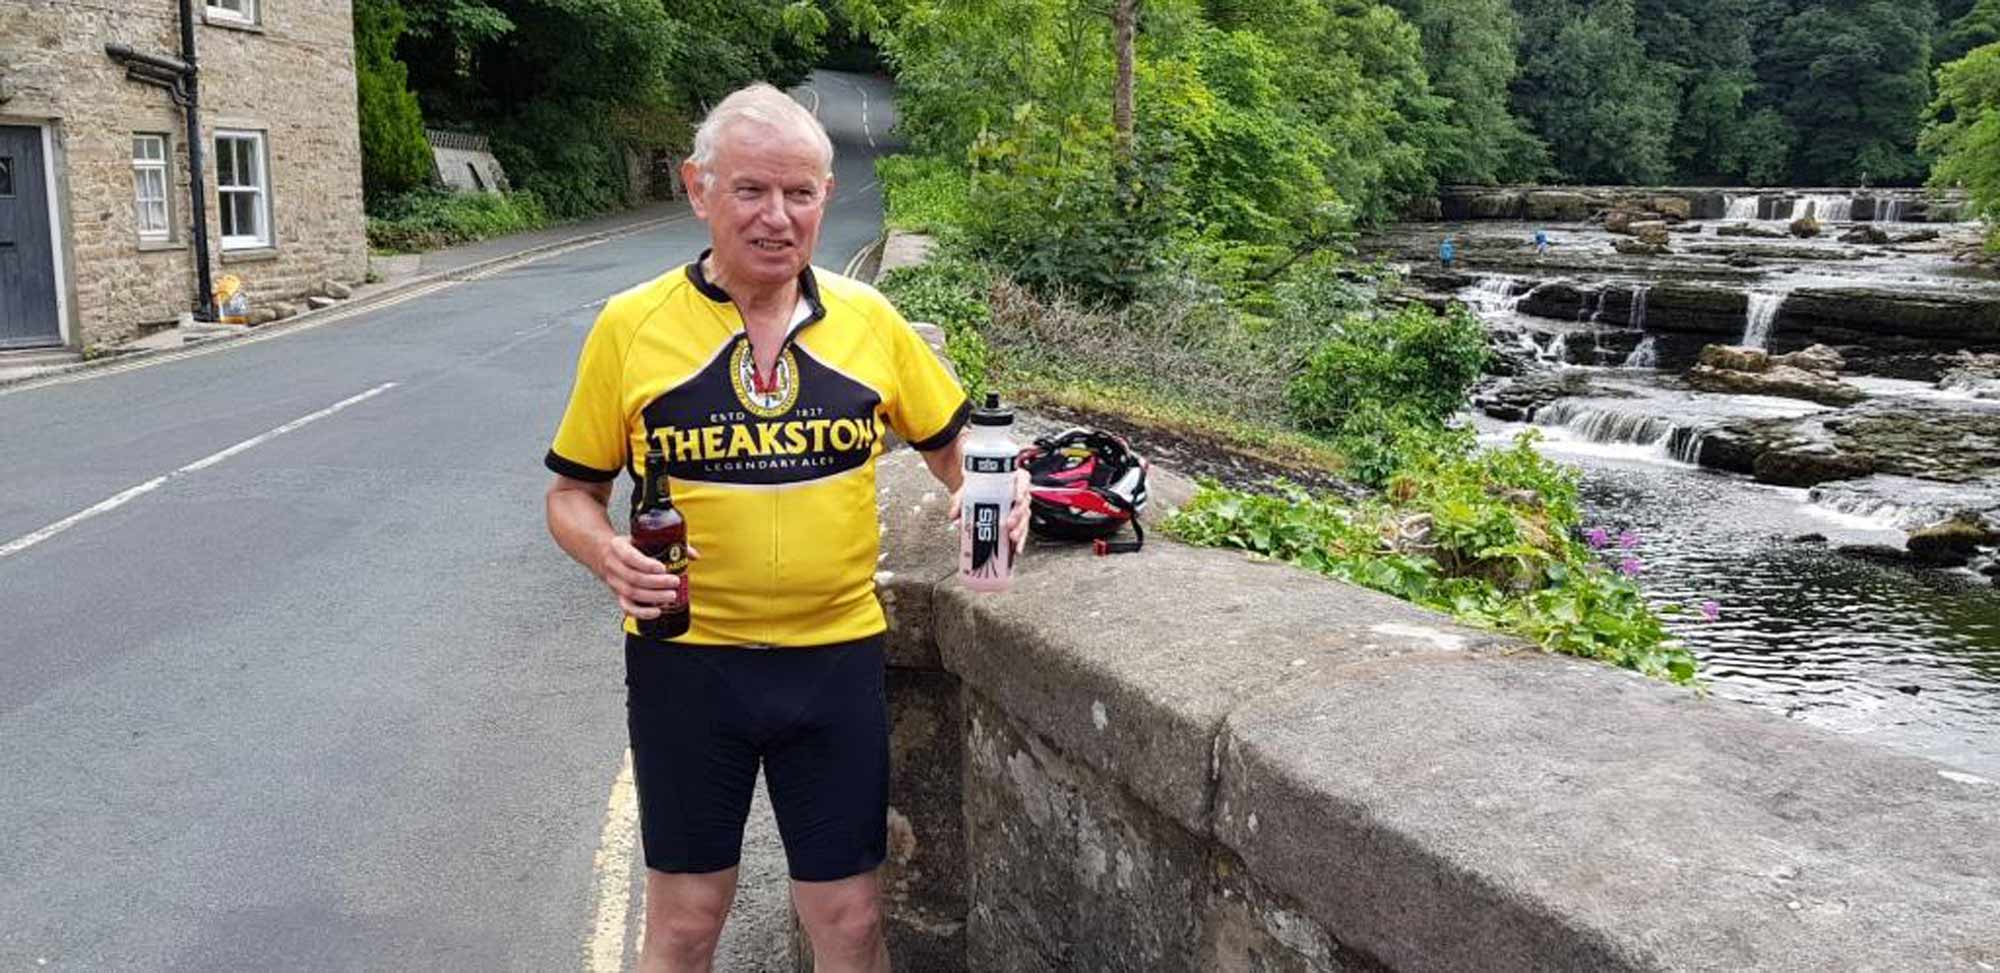 River Rider! Retired Major General Michael Charlton-Weedy, CBE DL, at the Black Bull in Paradise Inn, located within T&R Theakston Ltd’s Masham brewery visitor centre